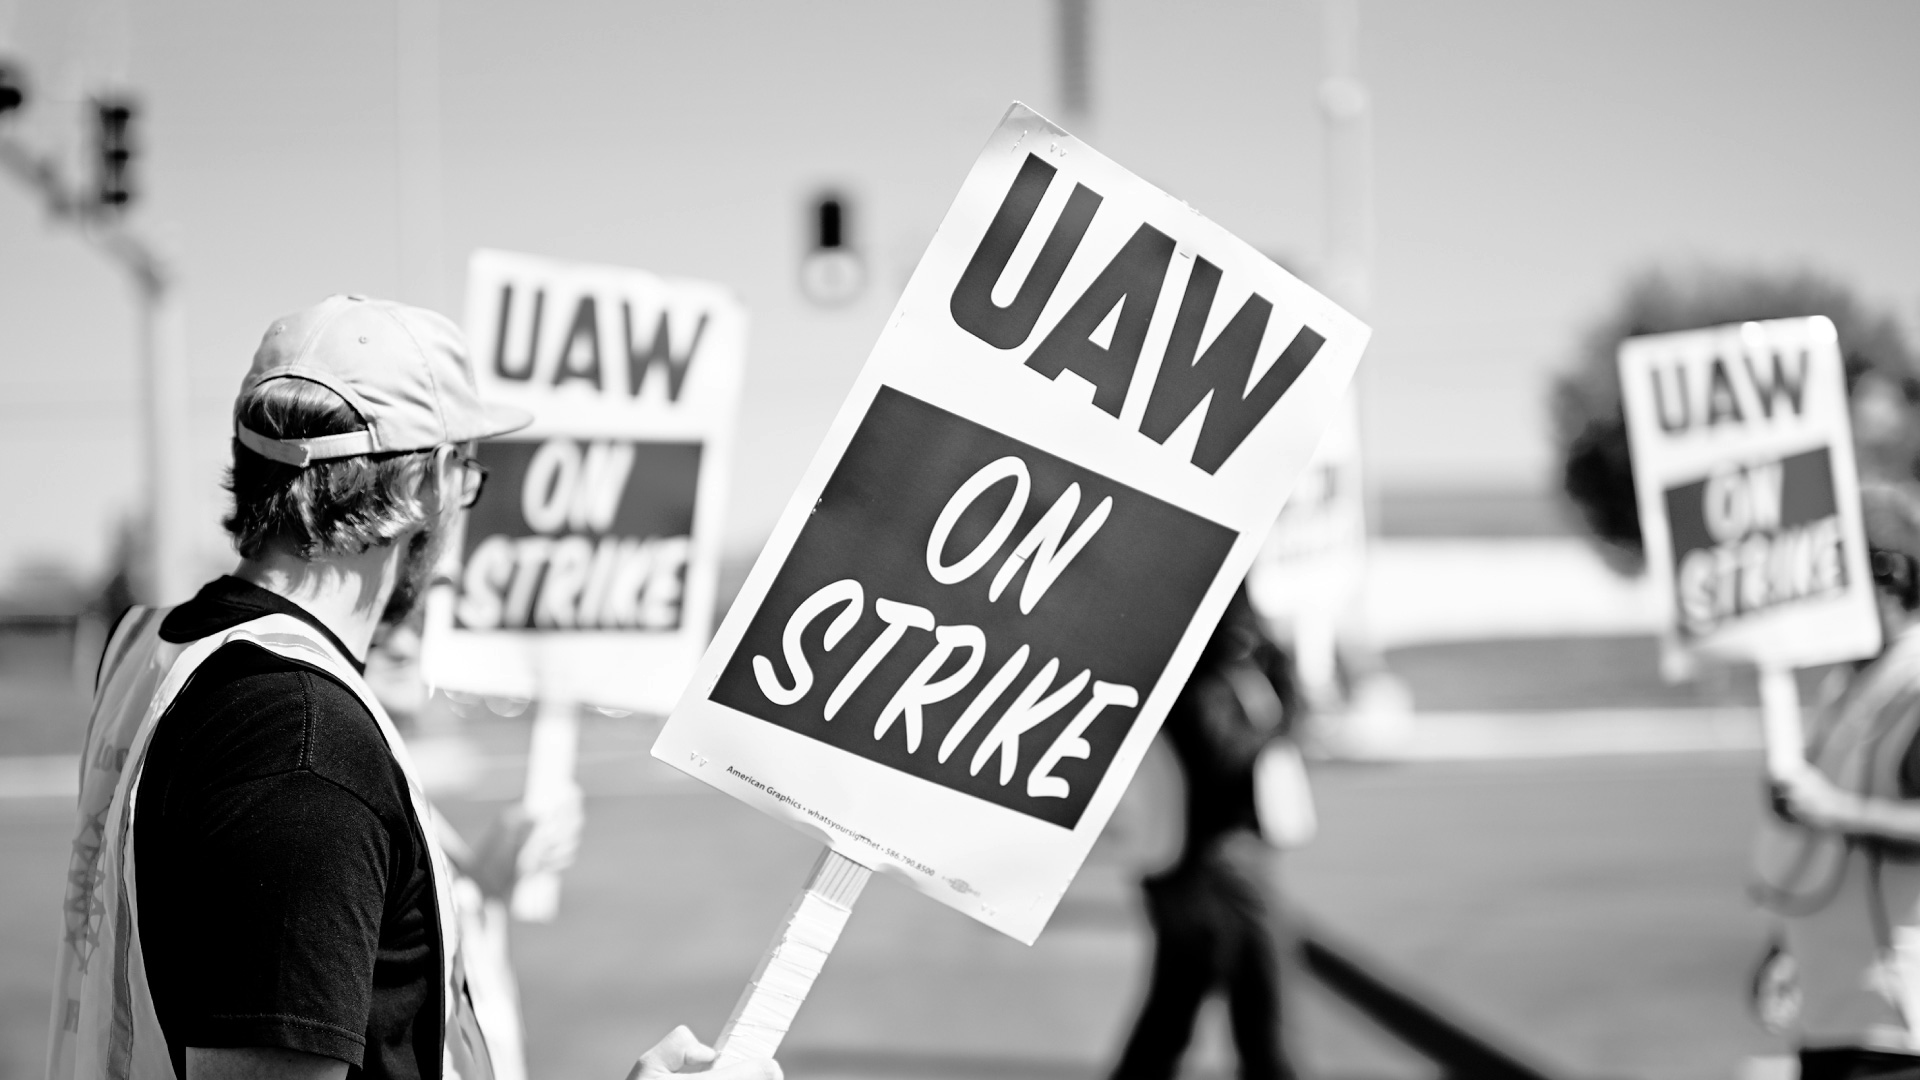 Graphic conveying the UAW strike.